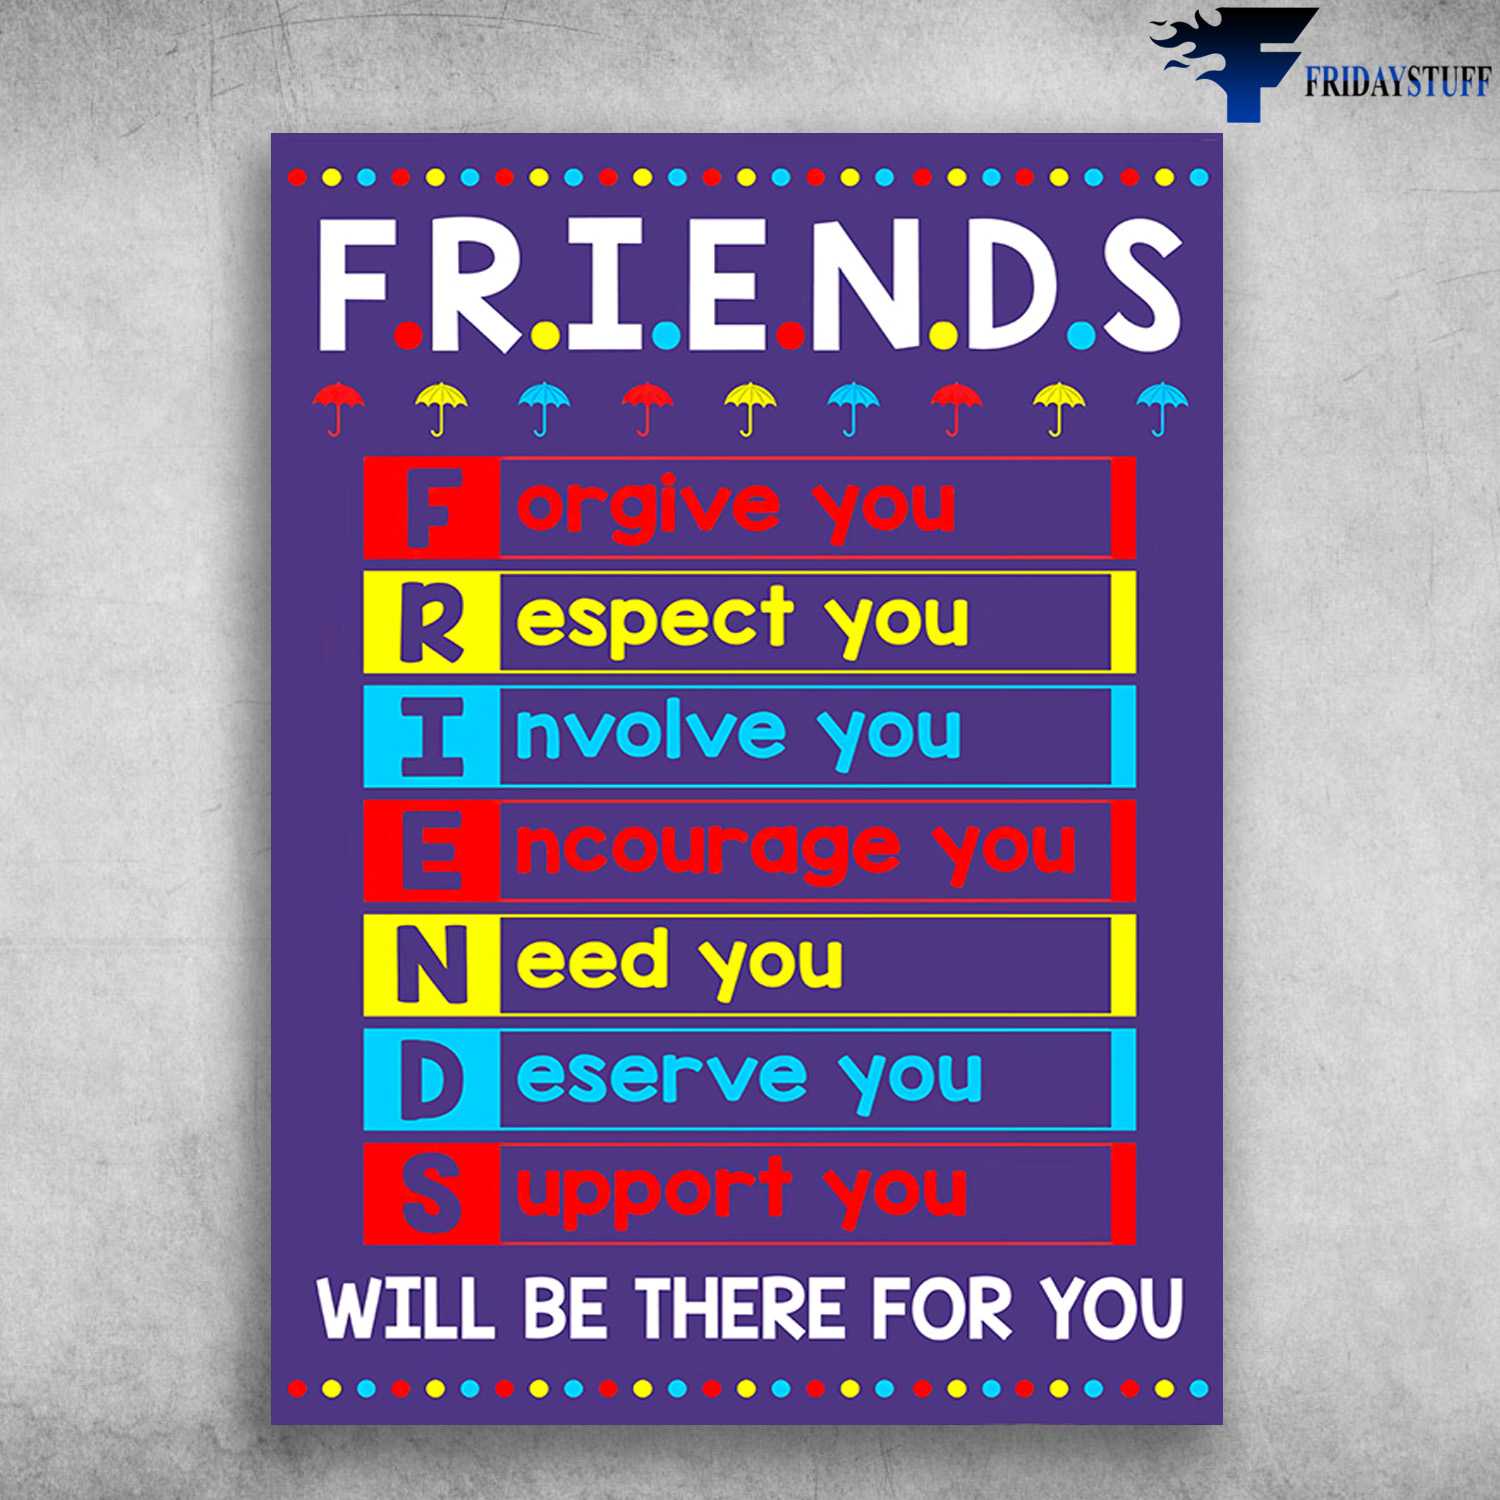 Friends Poster, Forgive You, Respect You, Involve You, Encourage You, Need You, Deserve You, Support You